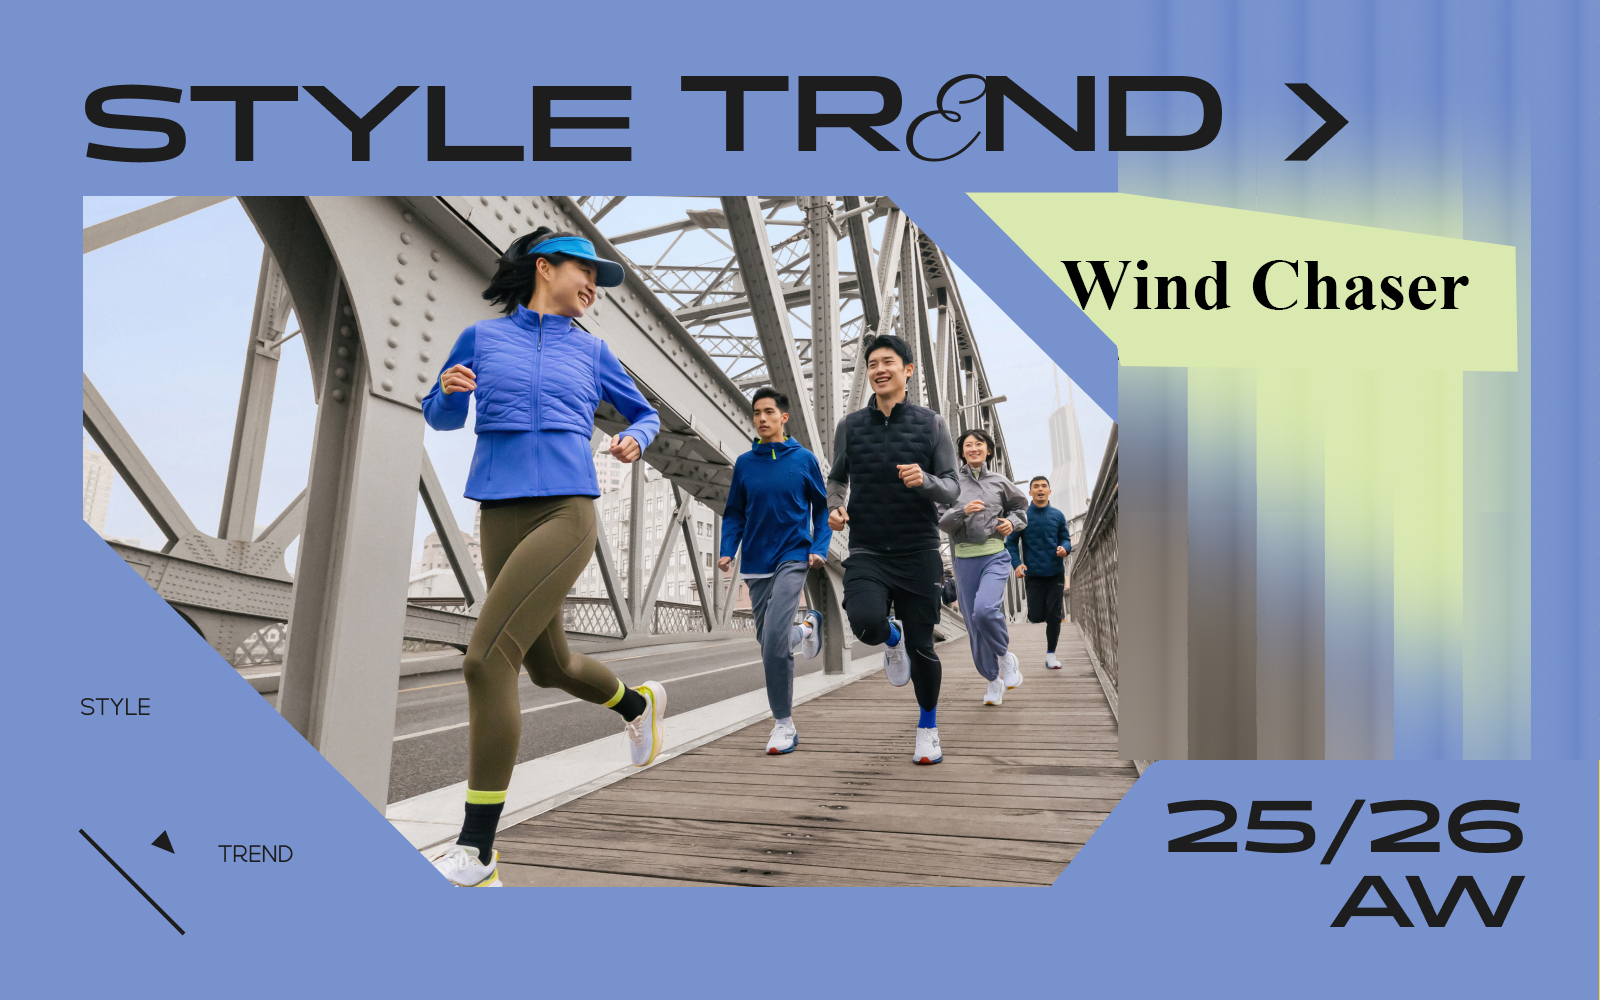 Wind Chaser -- The Design Development of Running Clothing